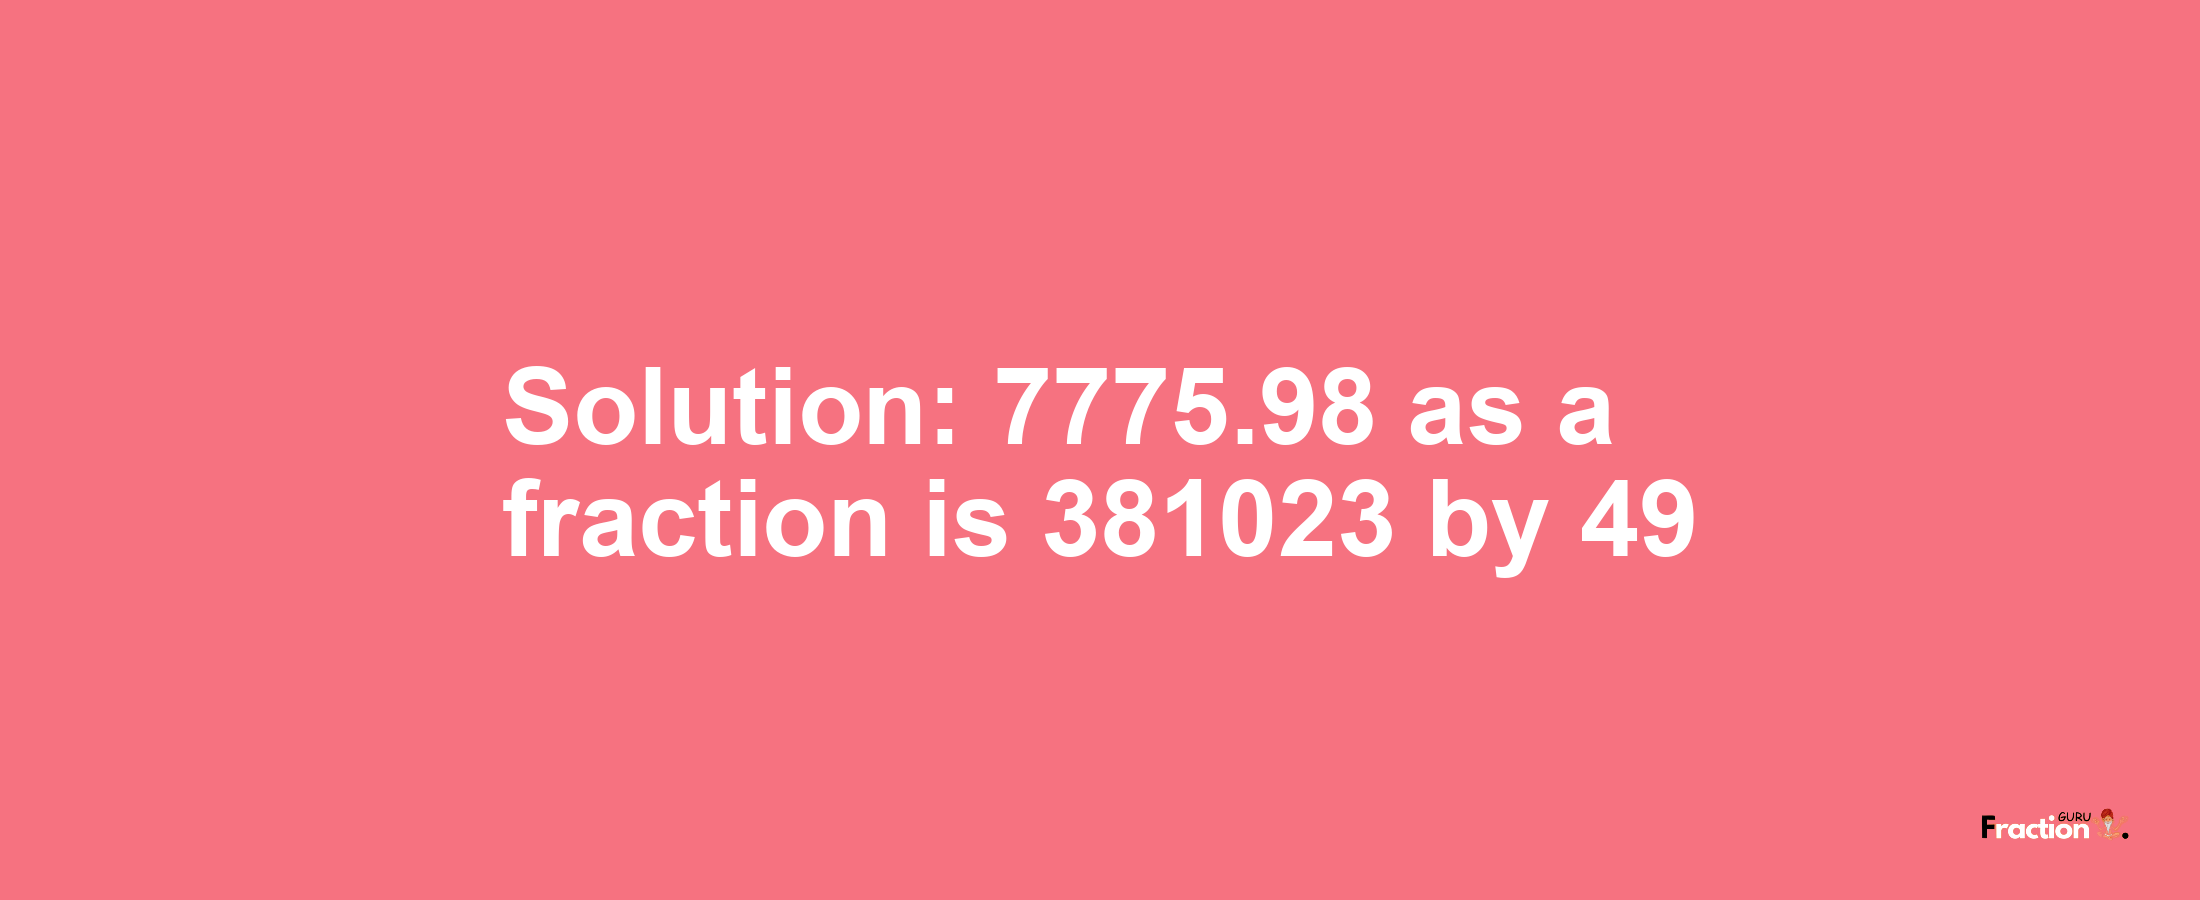 Solution:7775.98 as a fraction is 381023/49